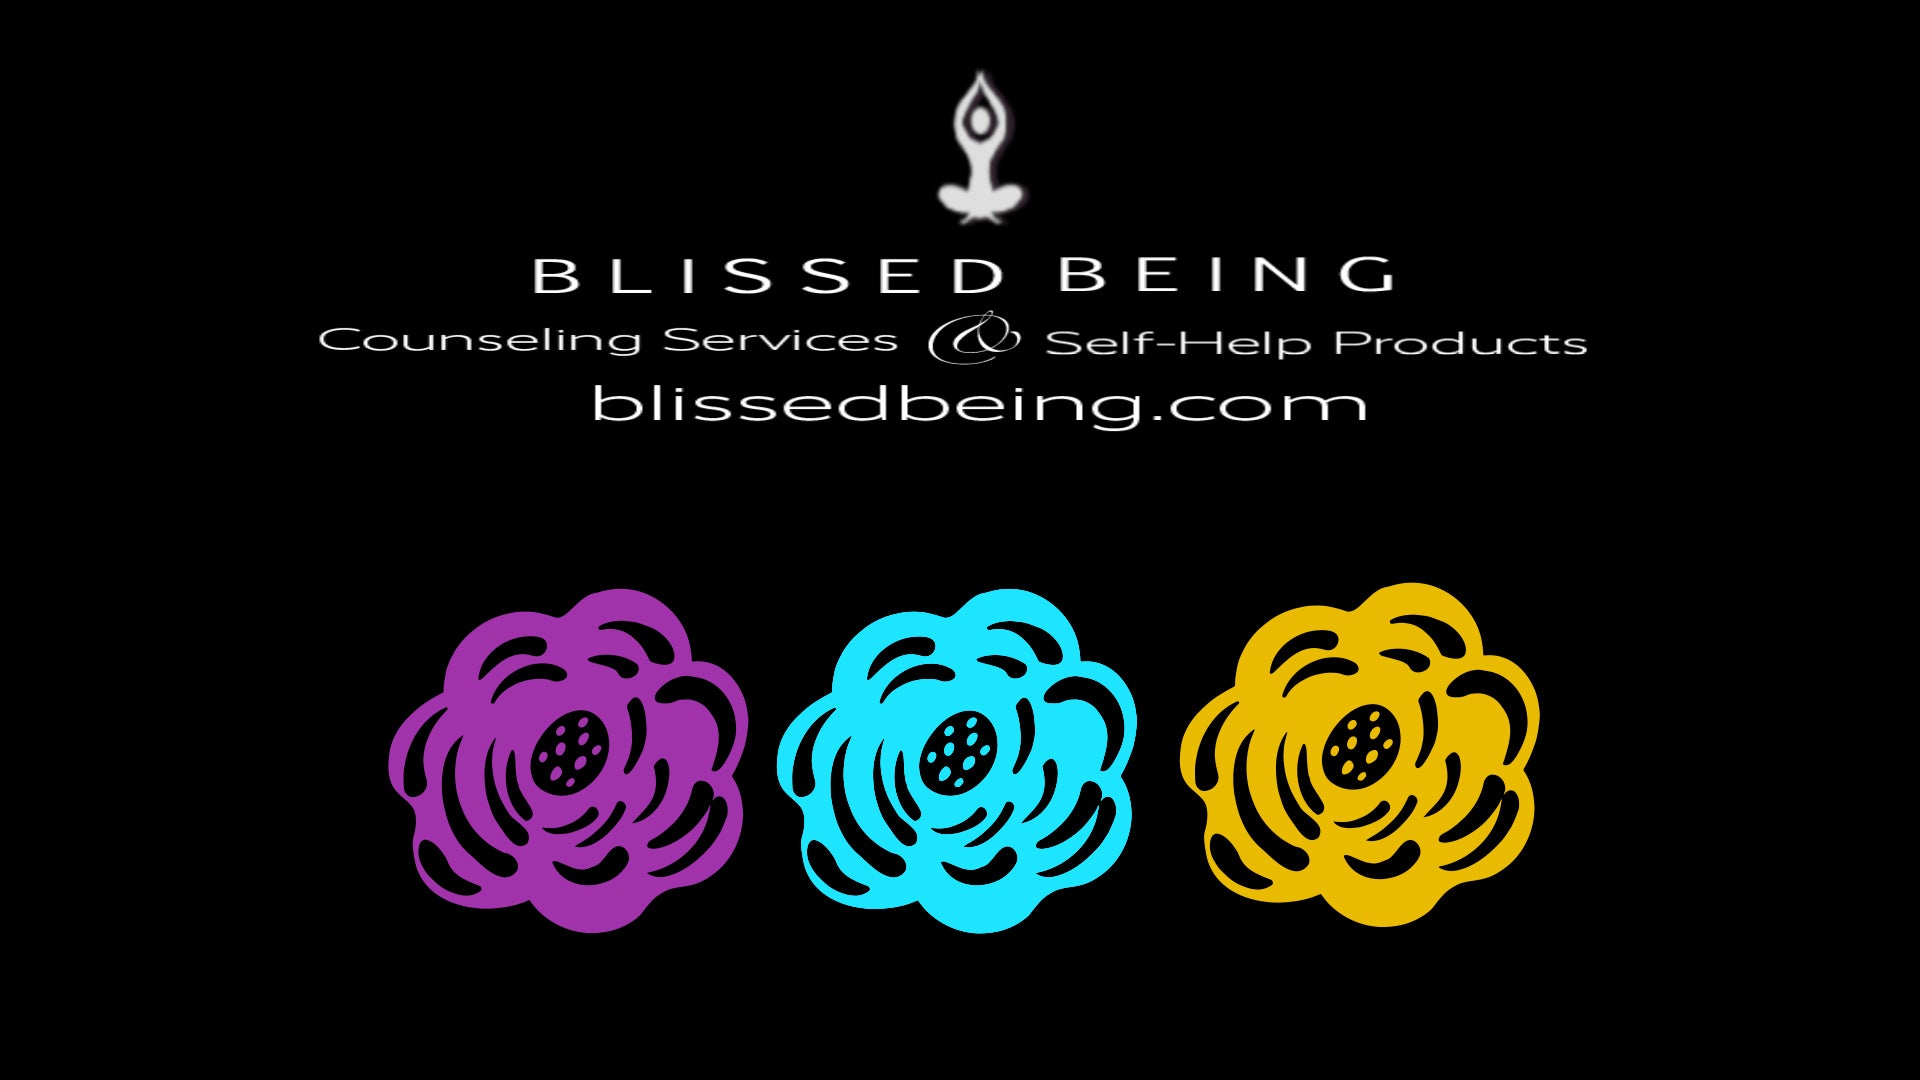 BLISSEDBEING.COM